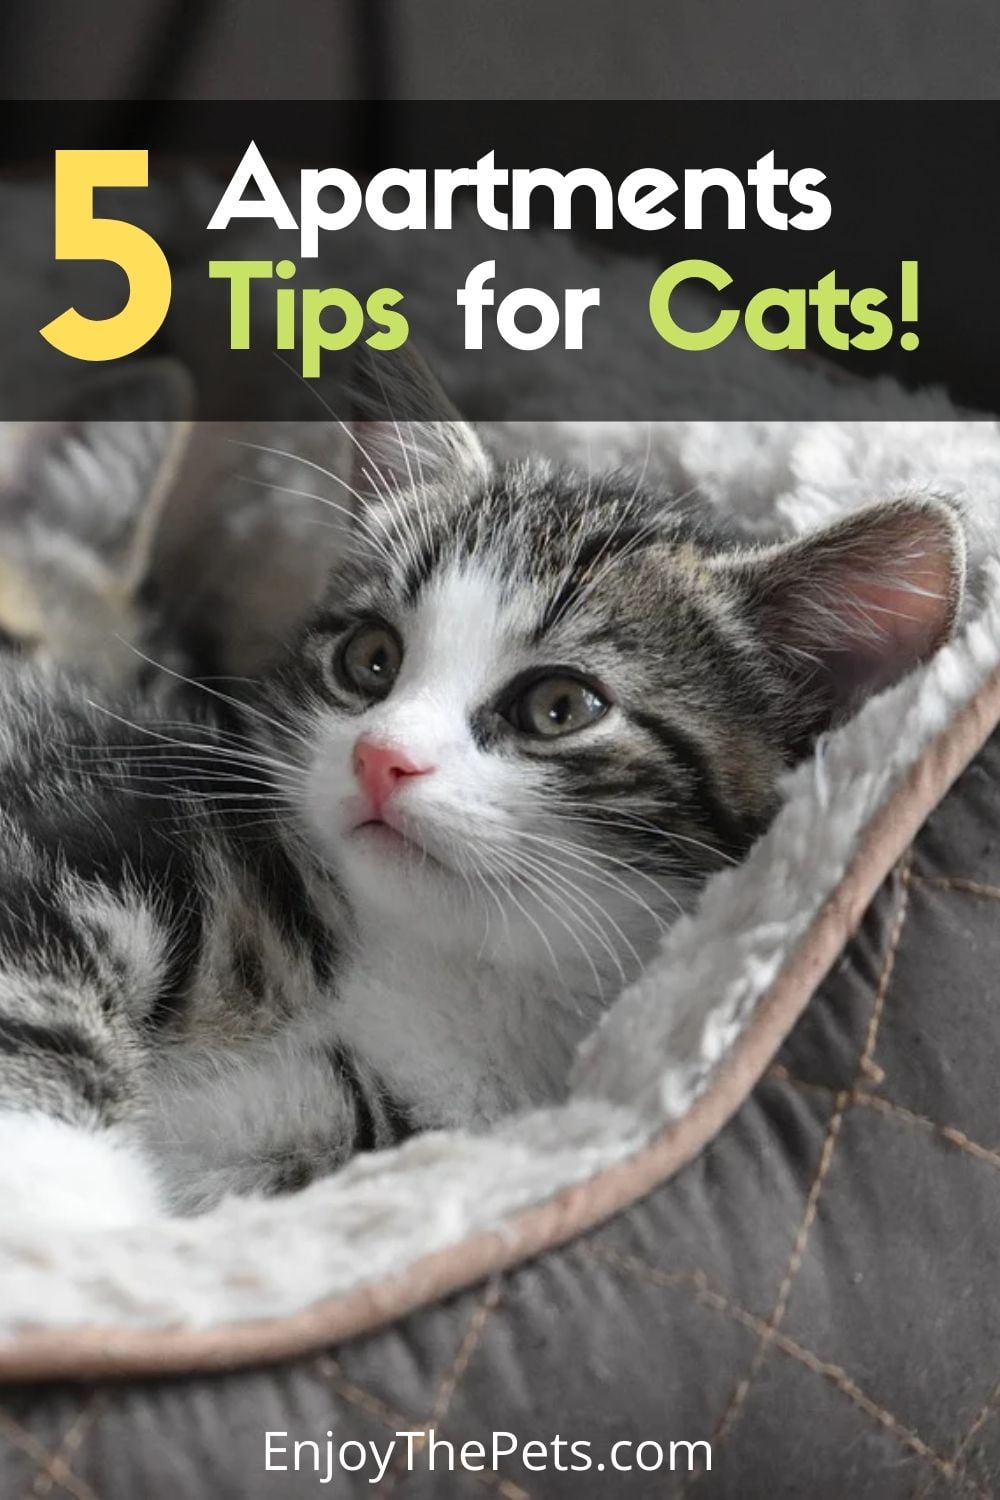 Apartments Tips for Cats